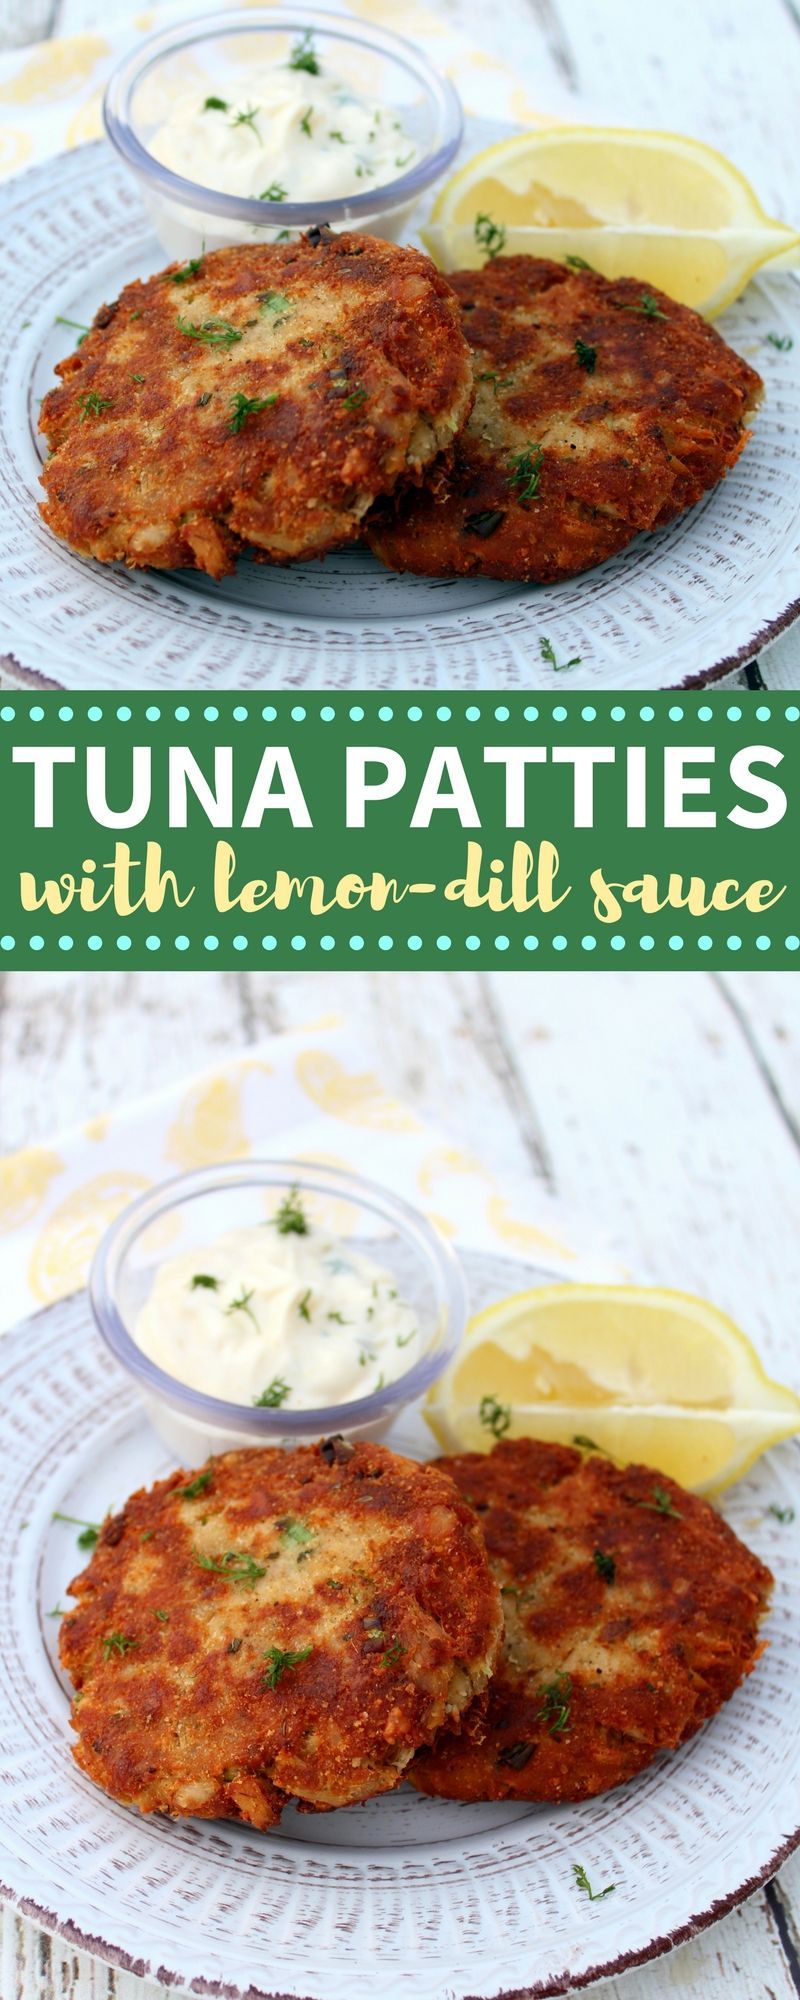 easy 4 step homemade tuna patties with lemon-dill sauce are a great weeknight meal!